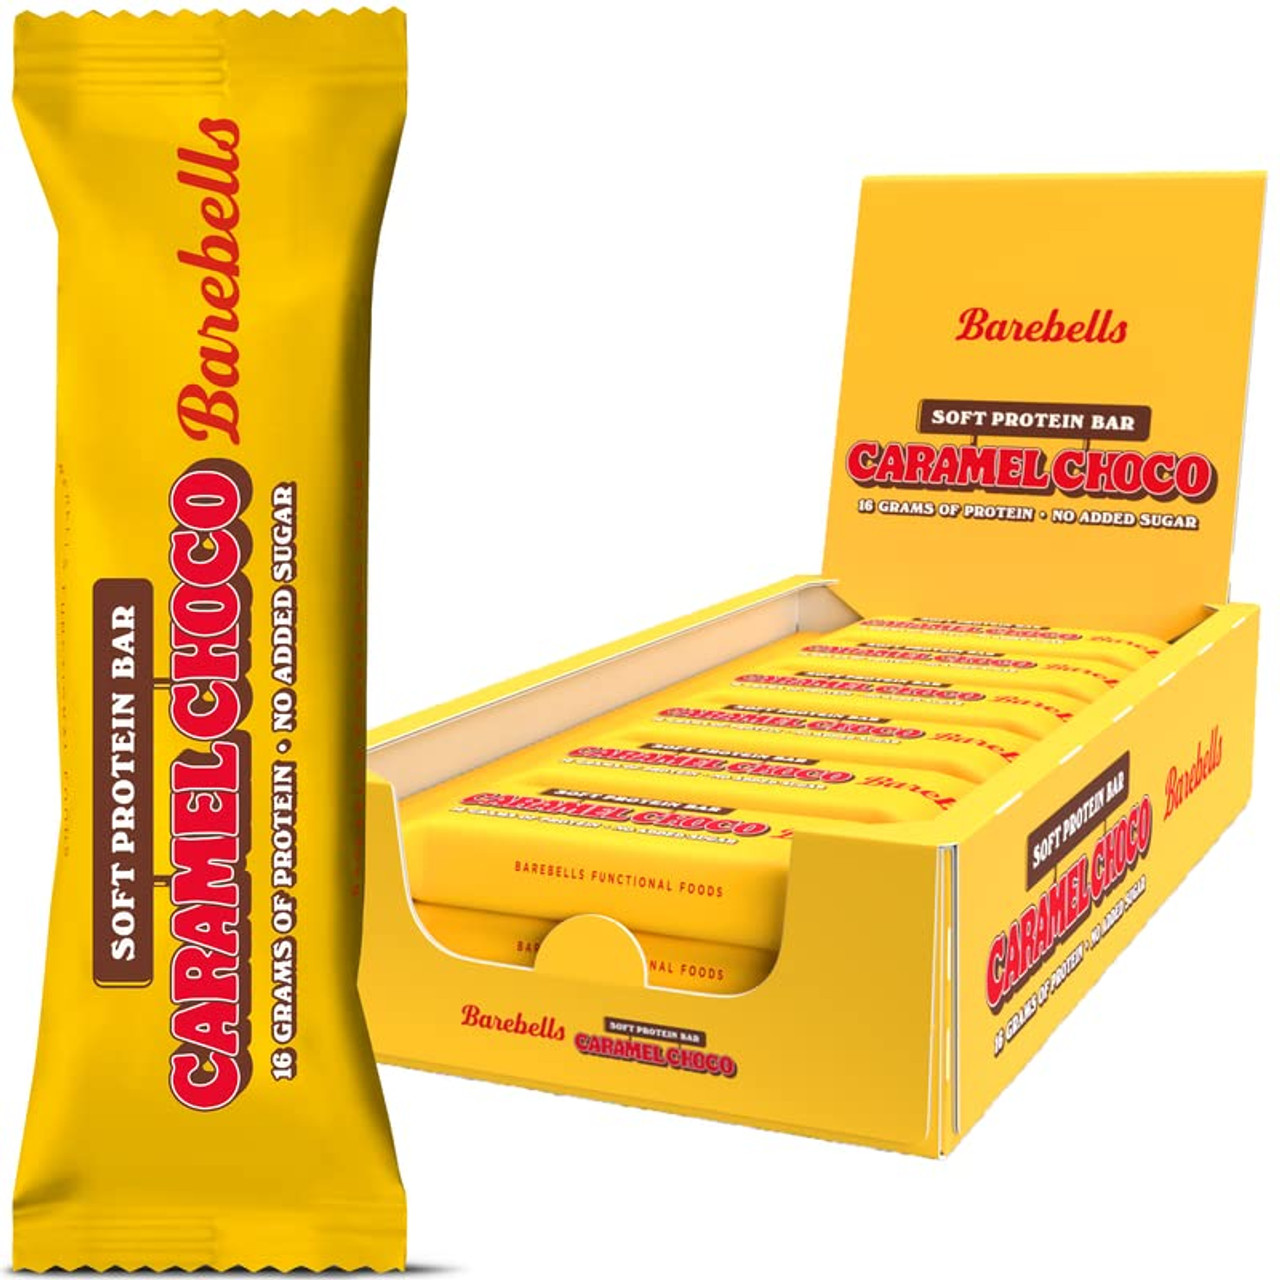 Barebells Protein Bars, 16g protein low carb chocolate bars